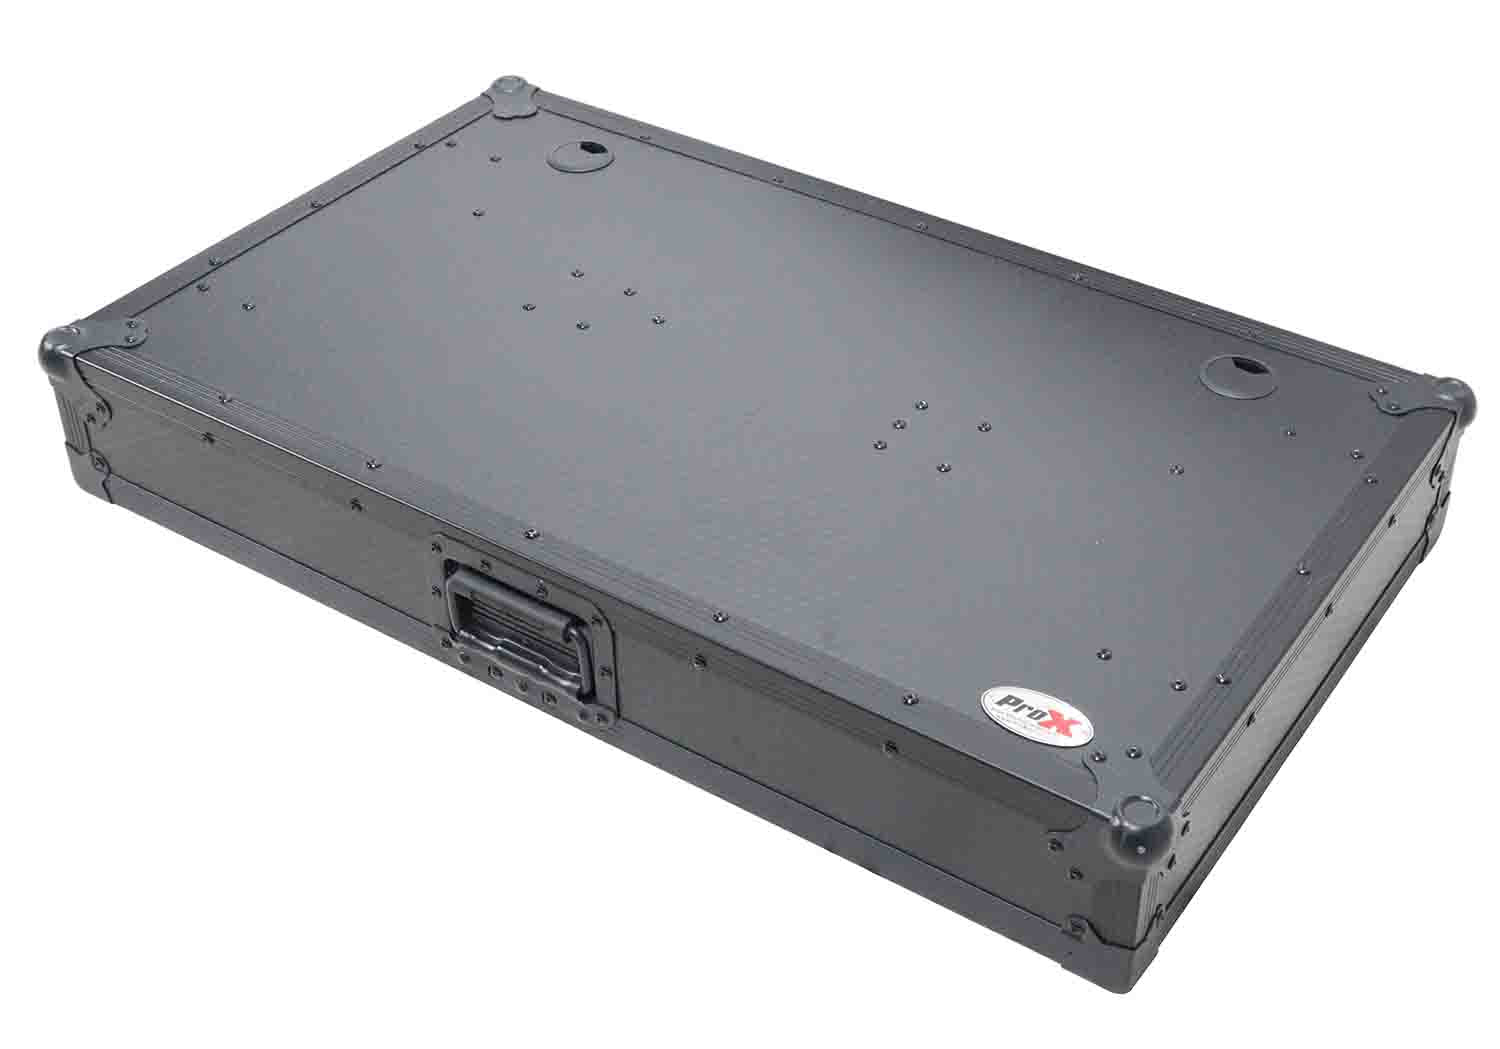 ProX XS-GIGTABLE26 (3FT) Gig-Table™ Universal Fold Out DJ Booth 26" Floor Height - Black Finish - Hollywood DJ